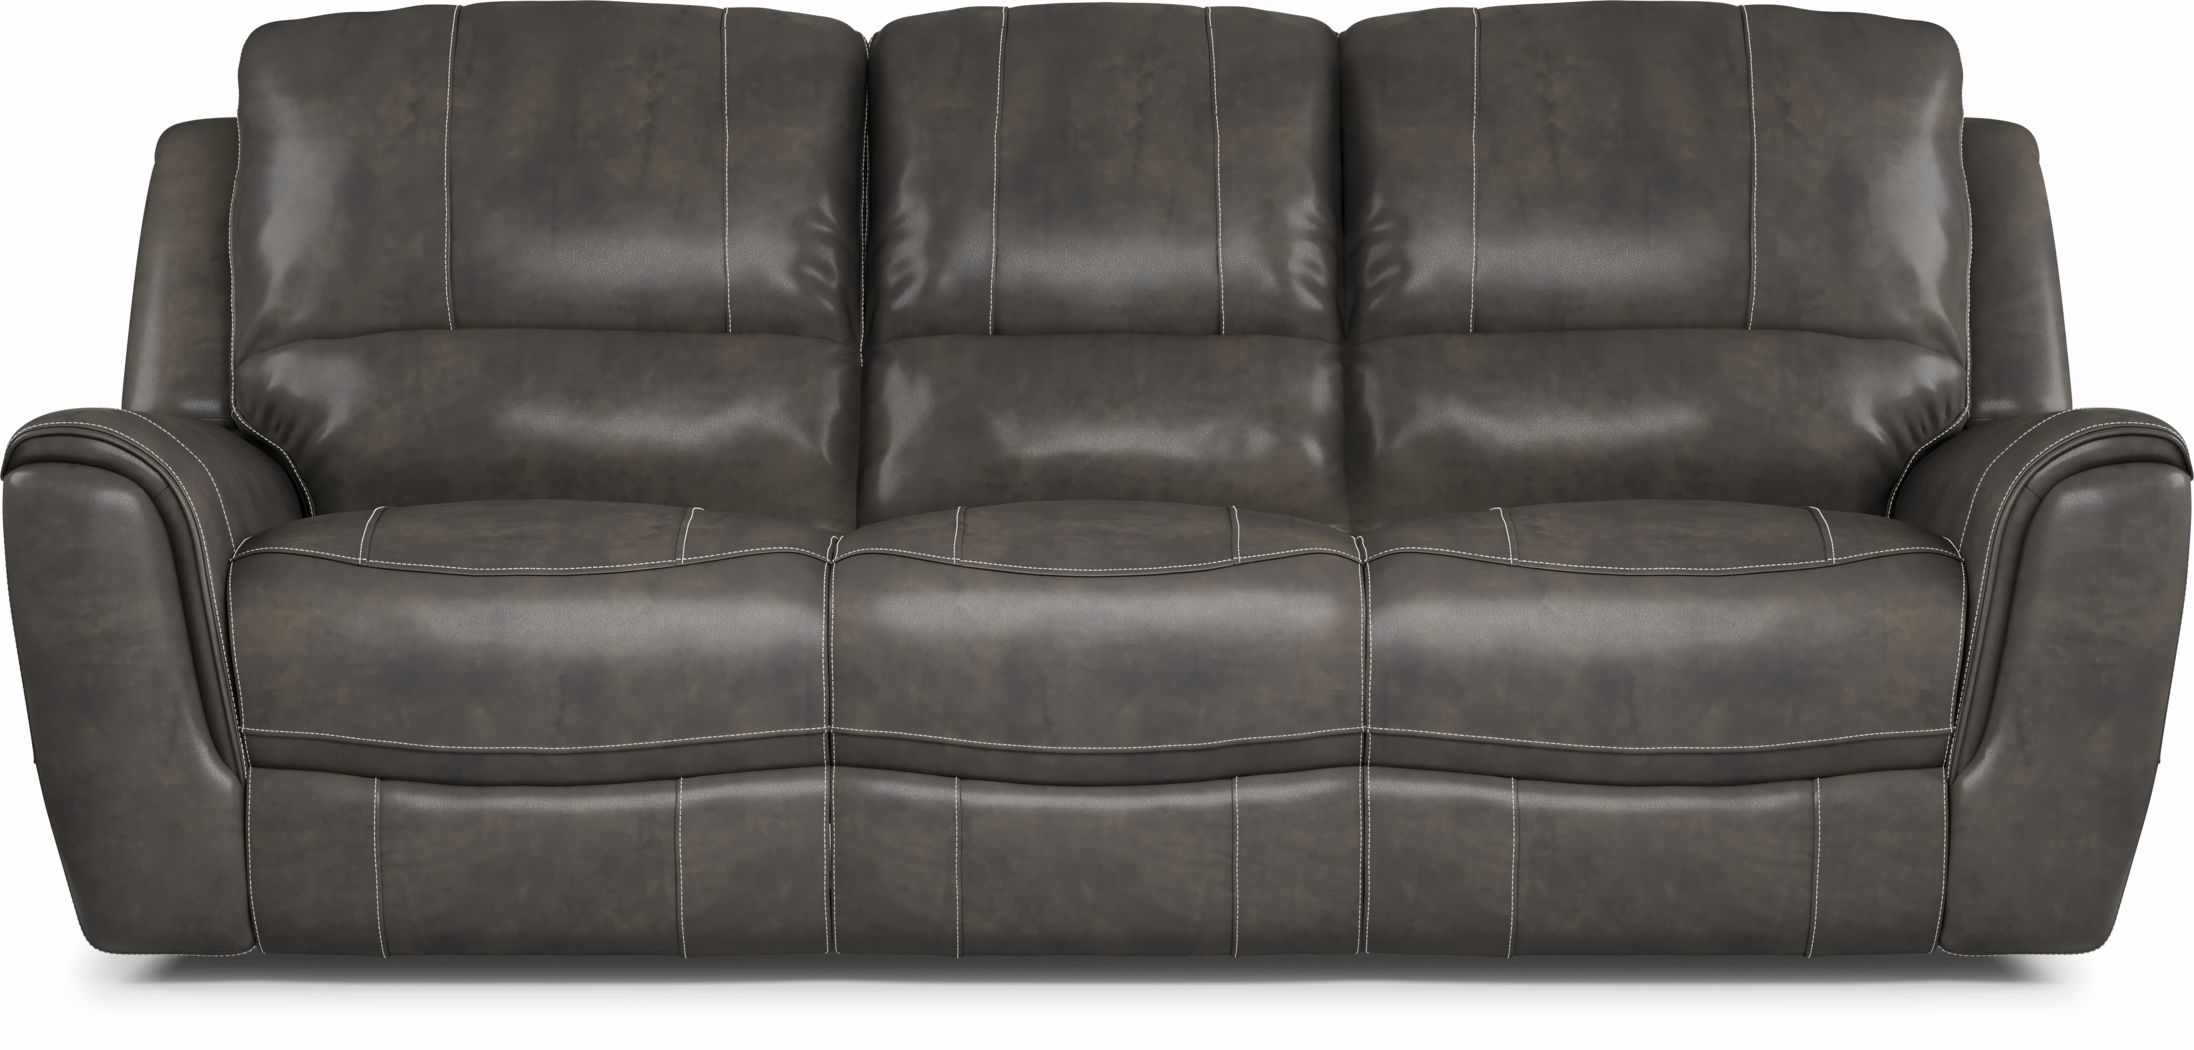 Leather Living Room Furniture, Rooms To Go Leather Recliner